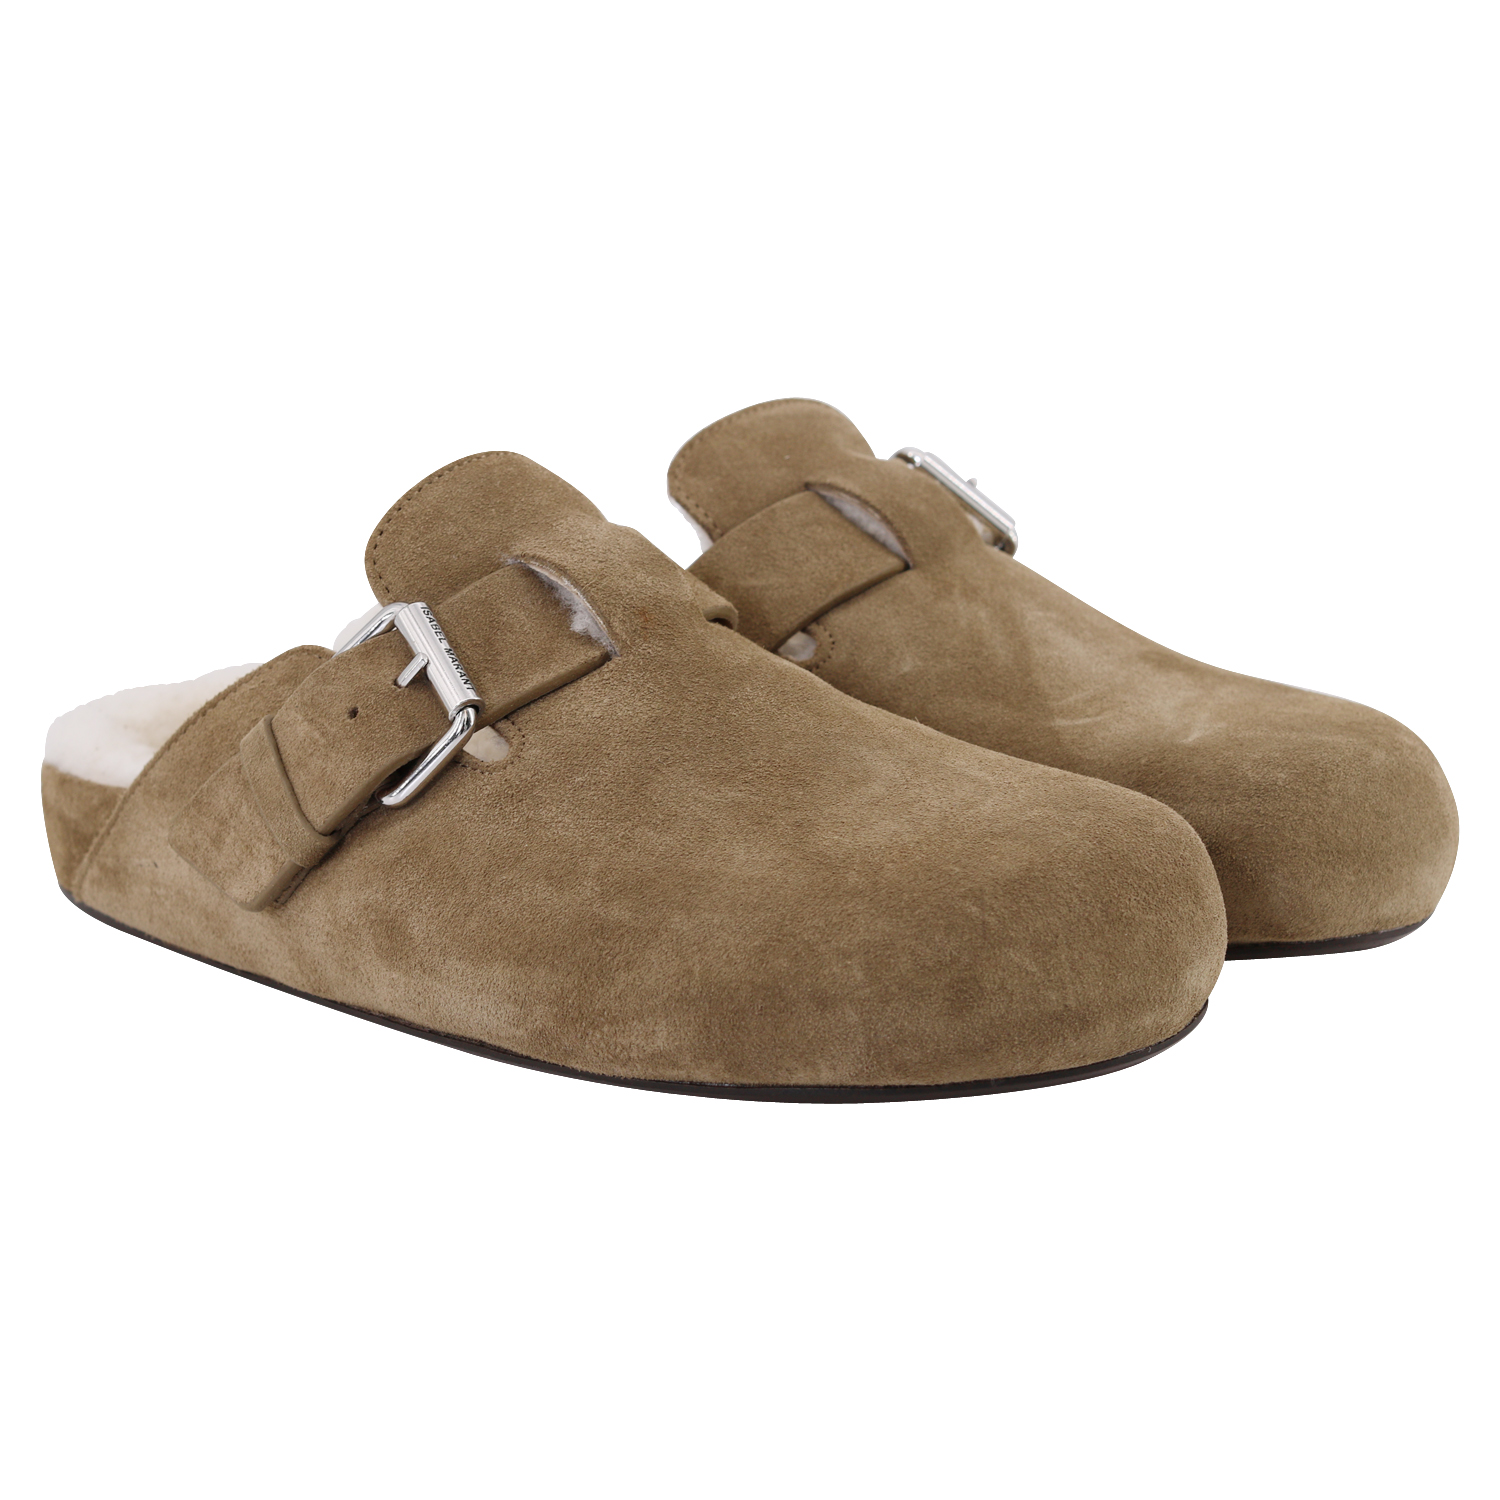 Isabel Marant Shearling Sandals Mirvin Taupe Suede 40